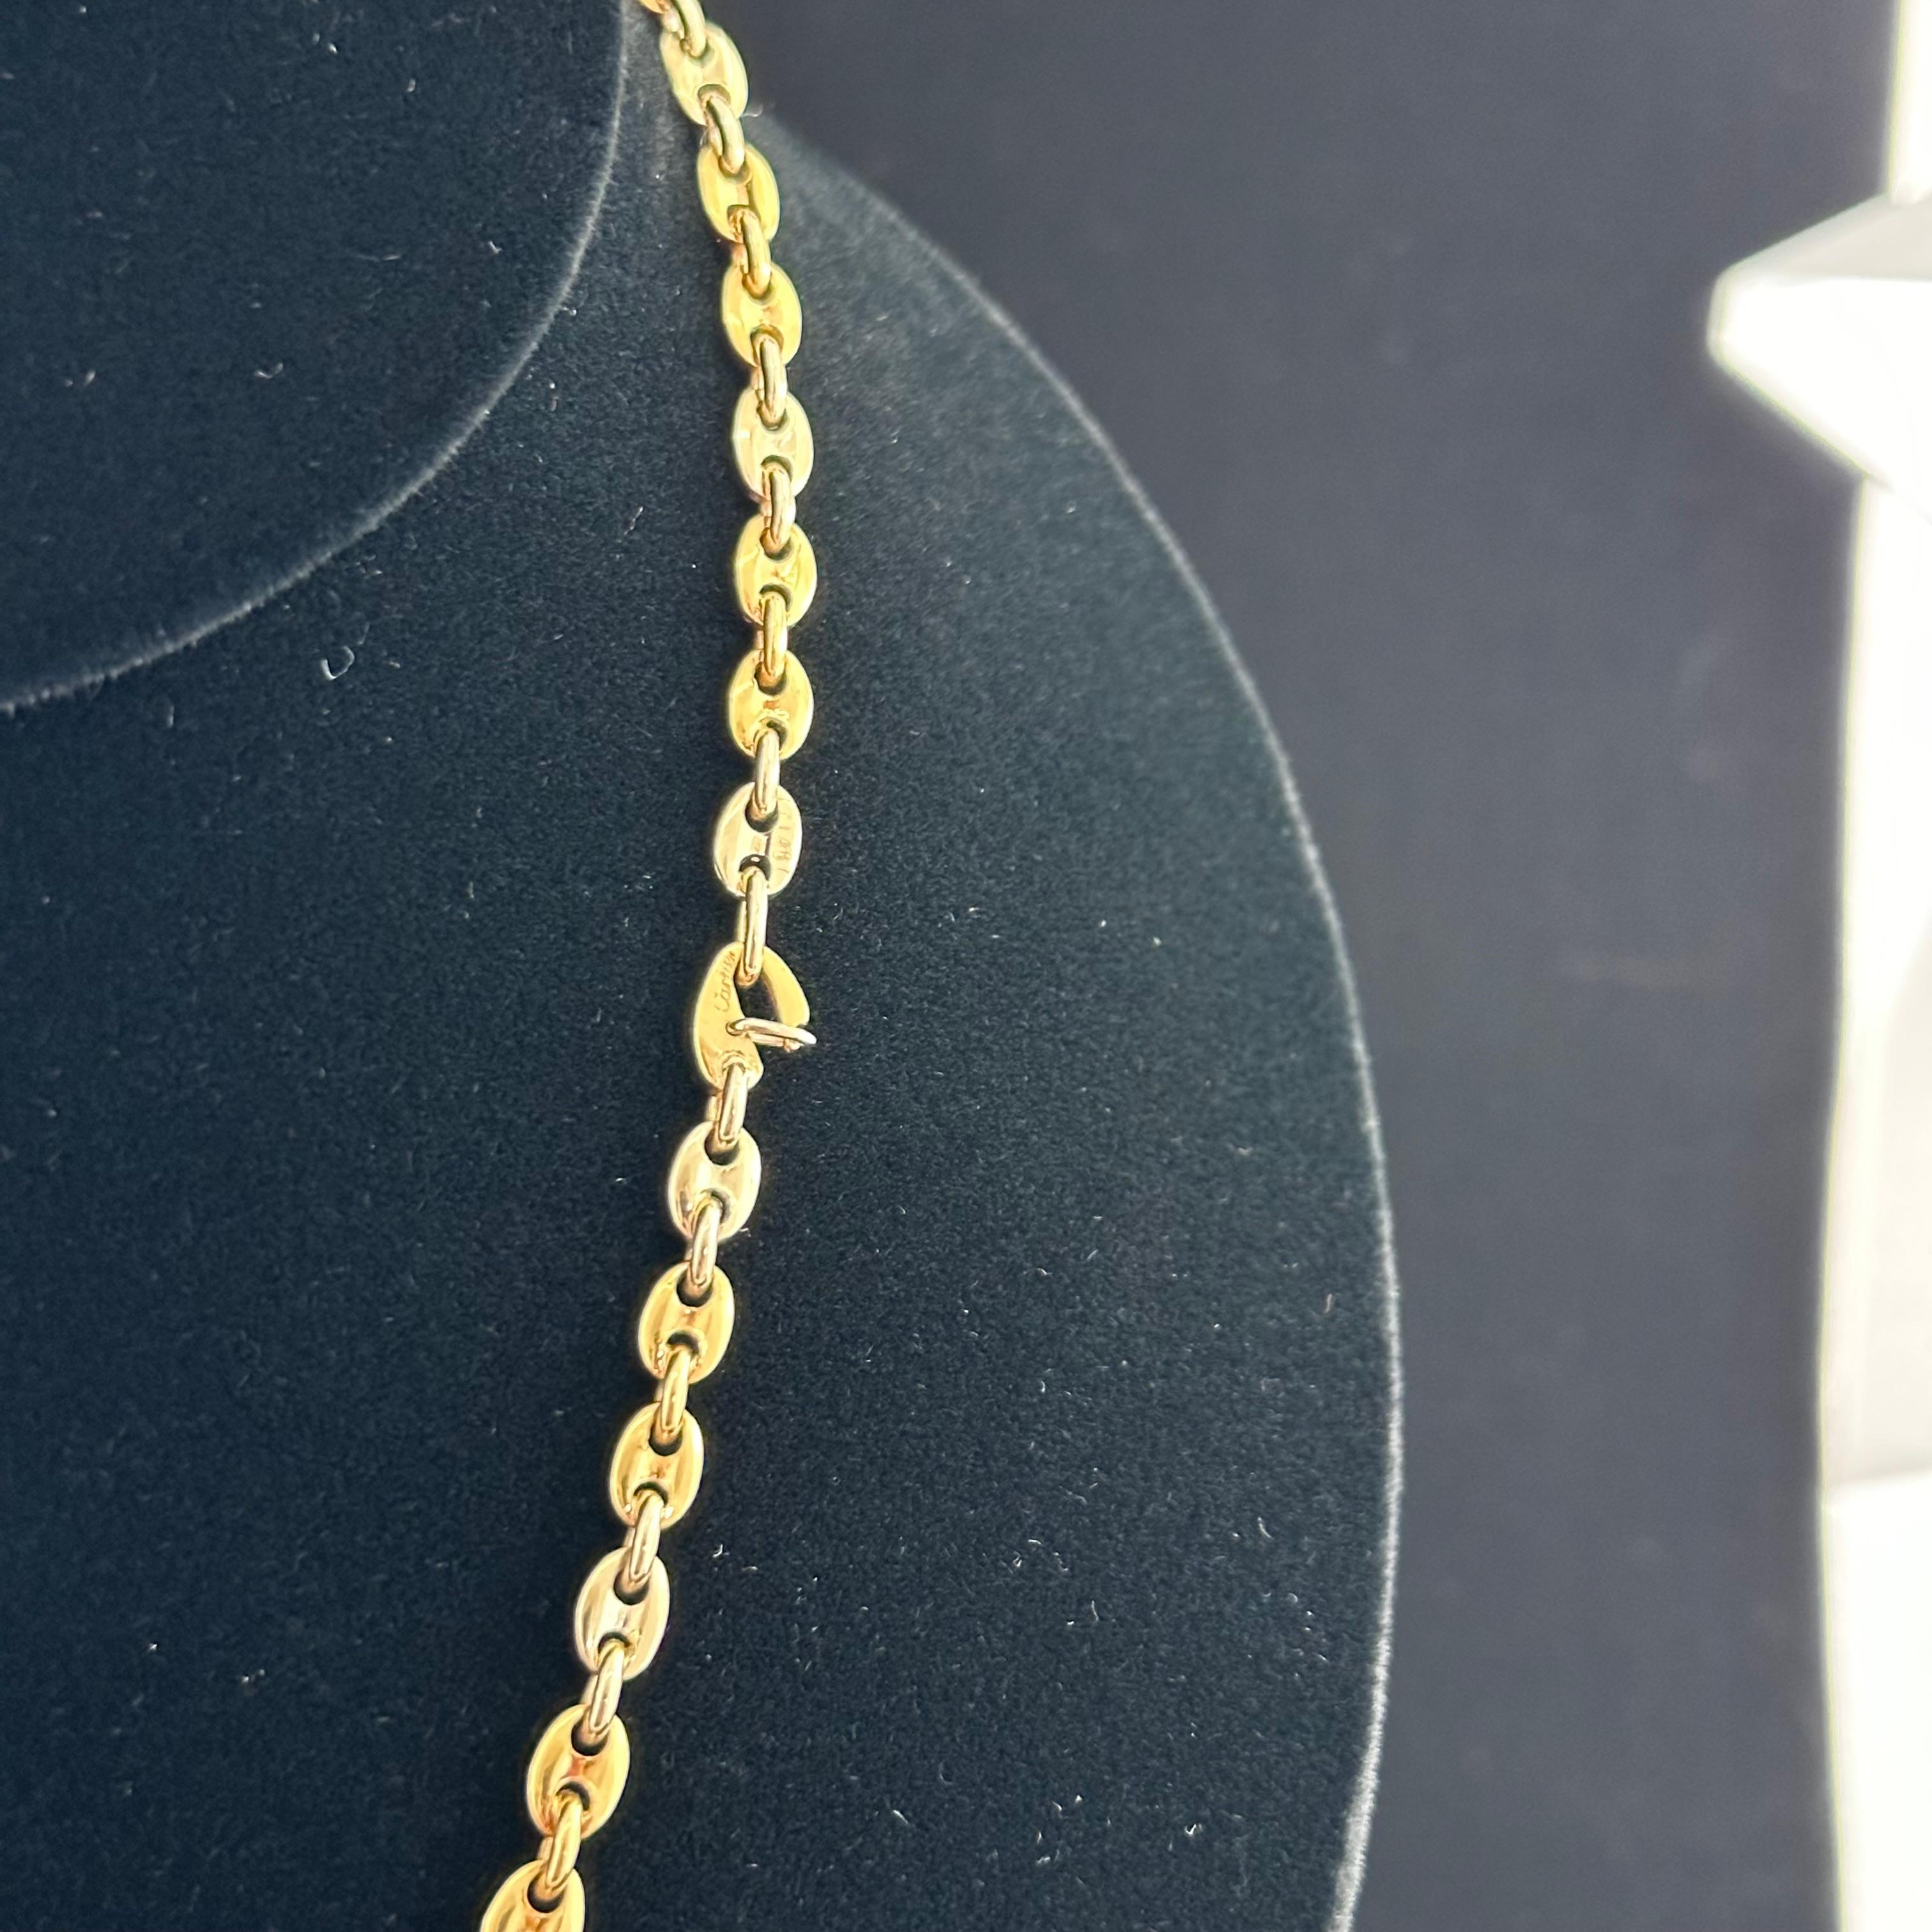 Cartier Marine Link Chain 18k Gold In Excellent Condition For Sale In Beverly Hills, CA